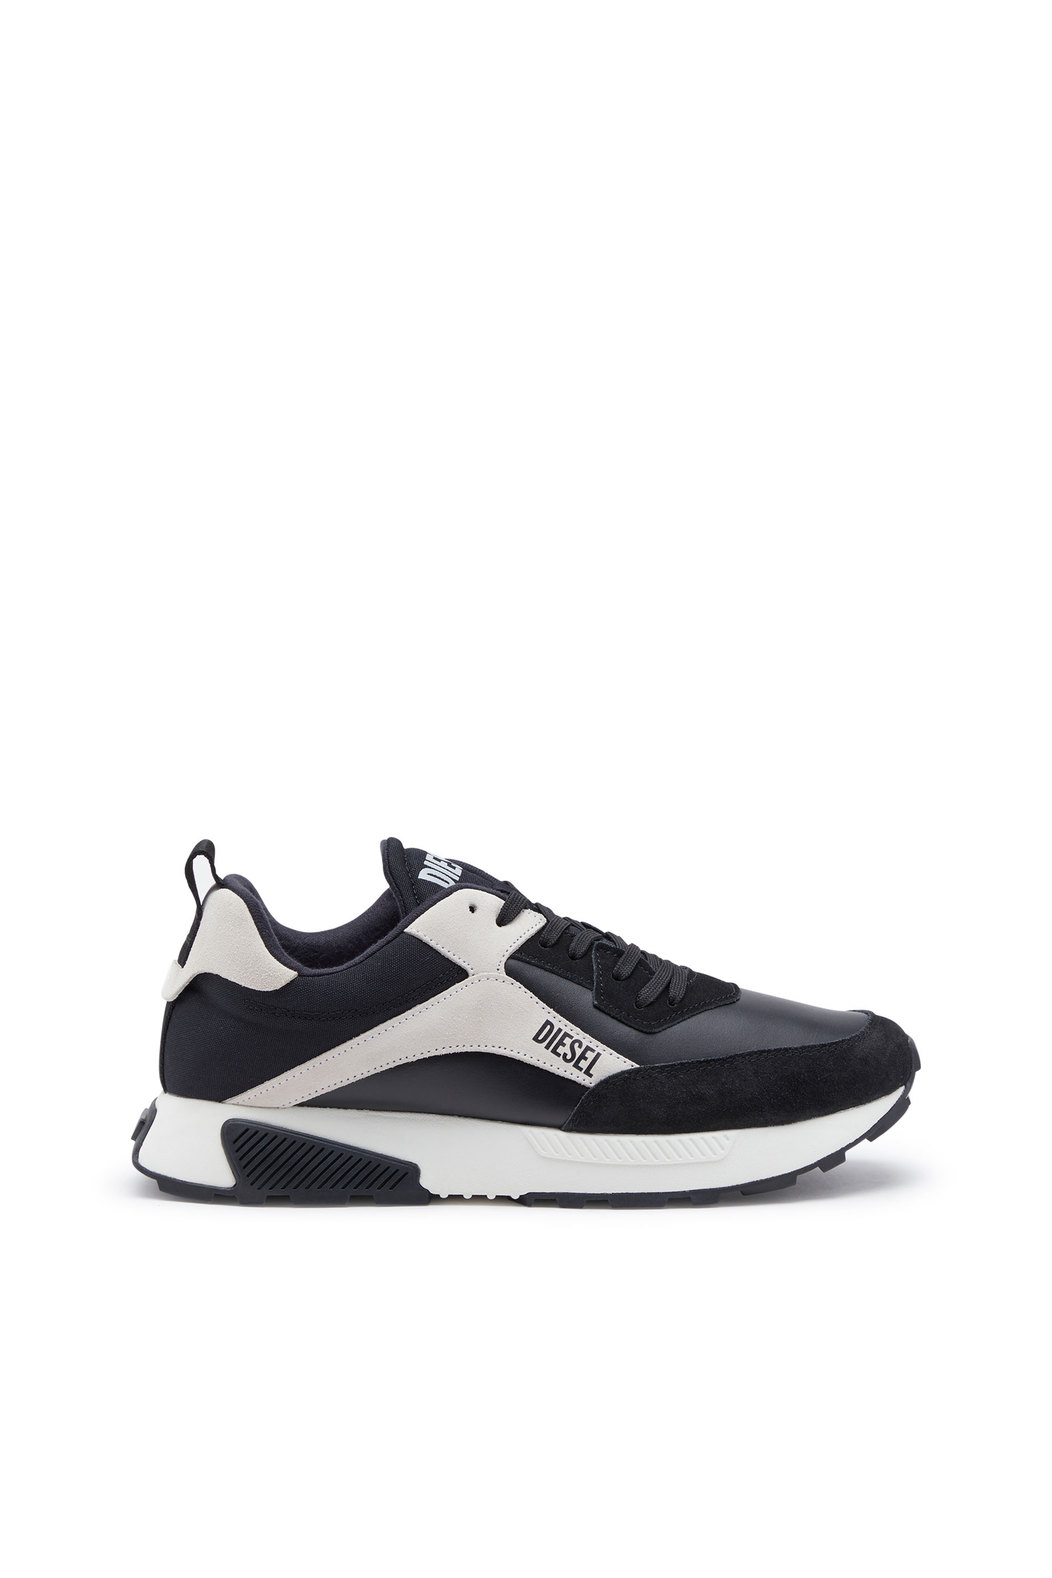 S-Tyche Low Cut - Sneakers in leather, suede and nylon | Diesel